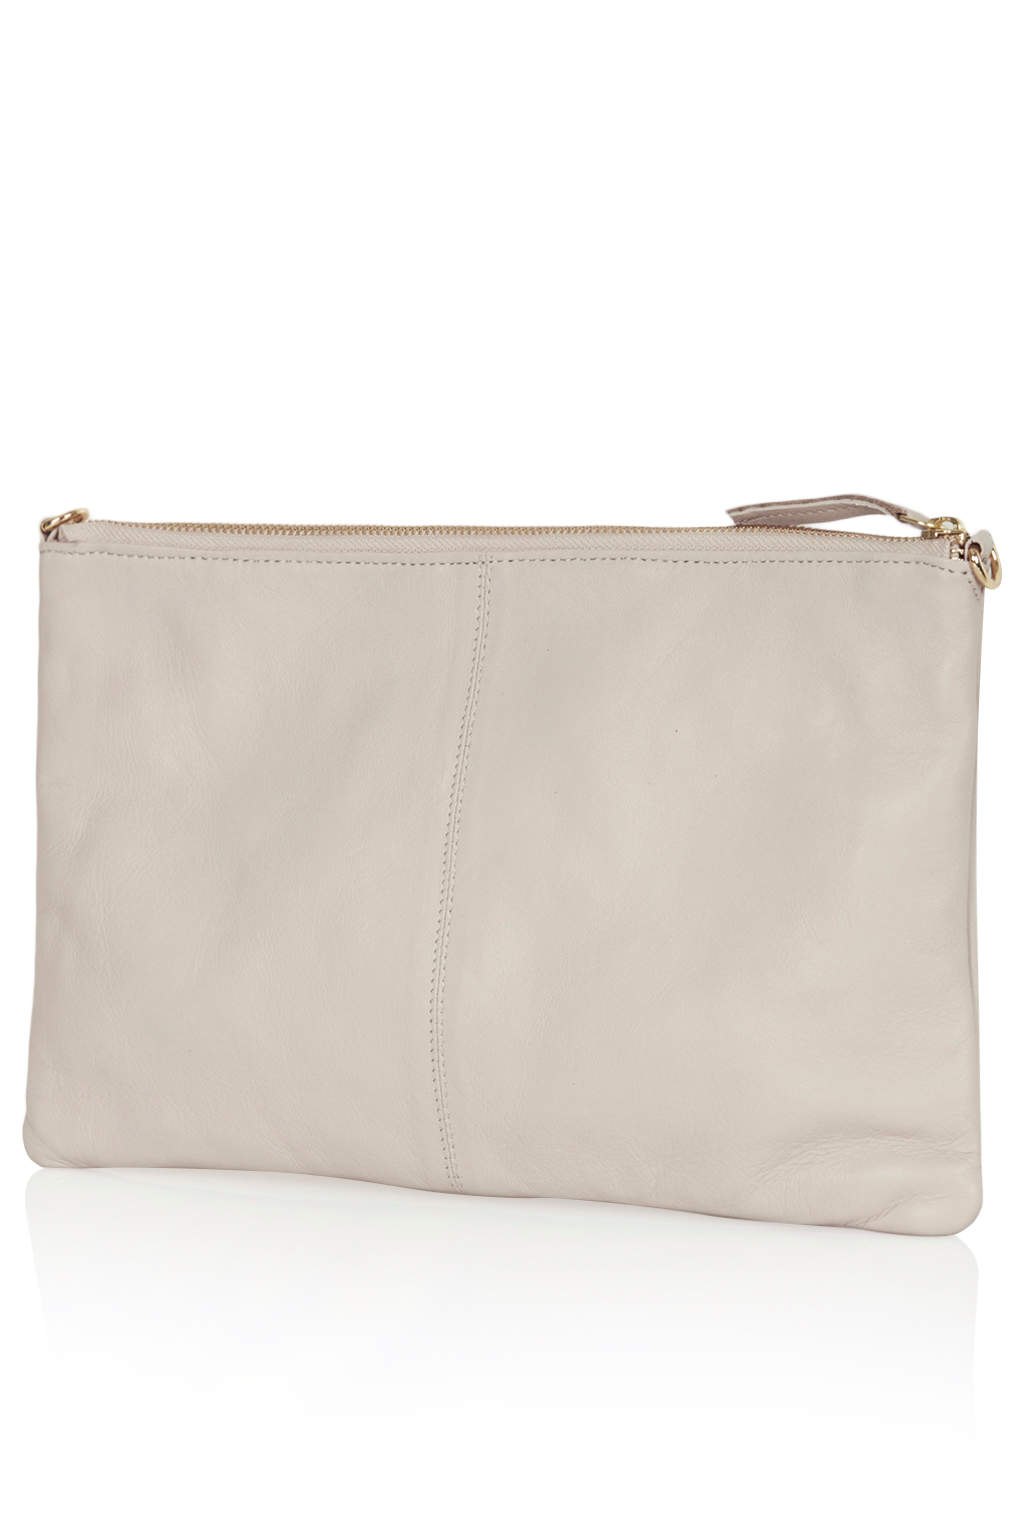 Lyst - Topshop Twisted Leather Clutch Bag in Natural